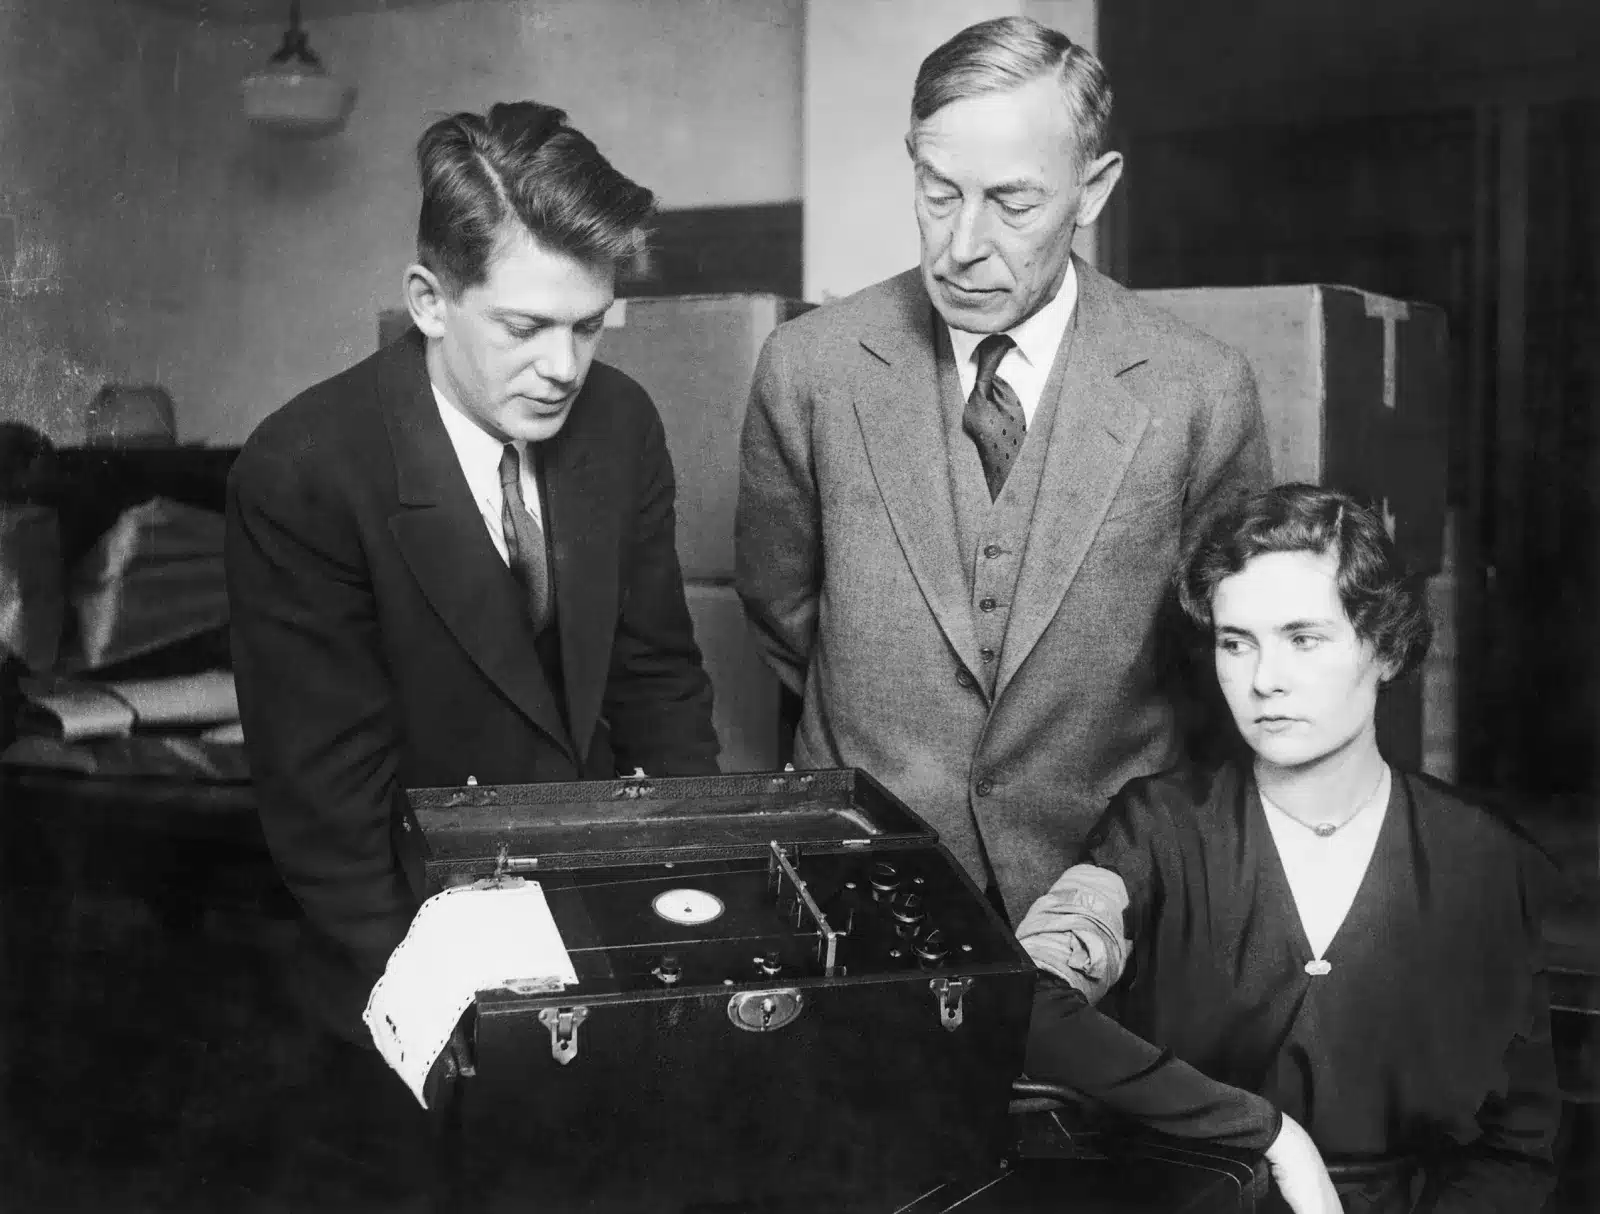 Leonarde Keeler (left) testing his polygraph machine on Marjorie Creighton in presence of August Vollmer during a trial in Chicago in 1932